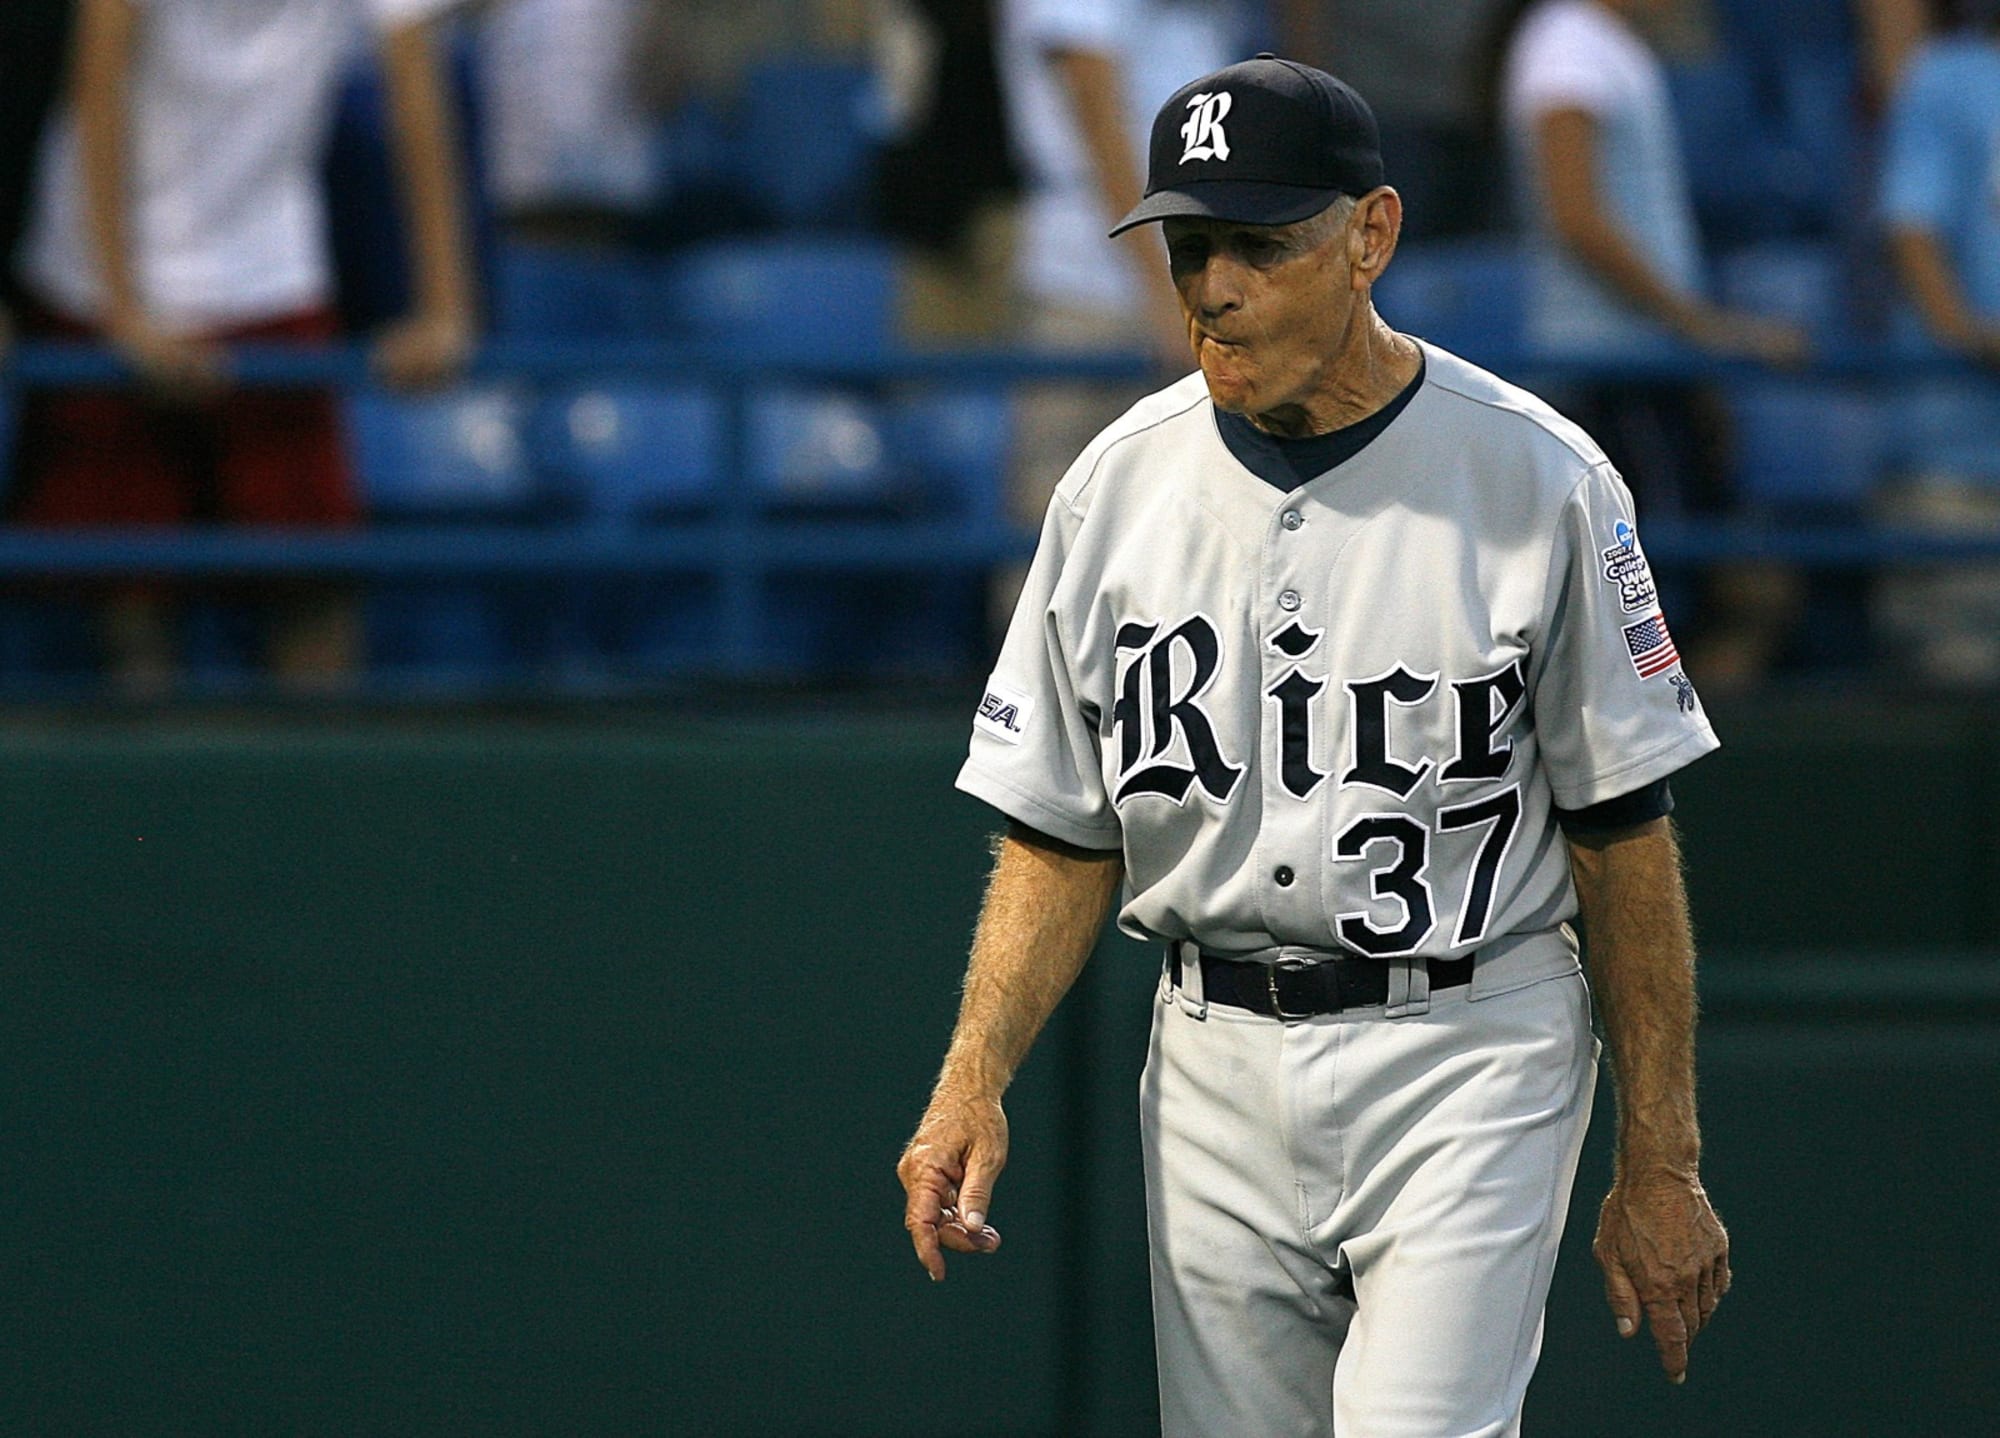 Houston Sports: The end of an era for Rice Owls baseball